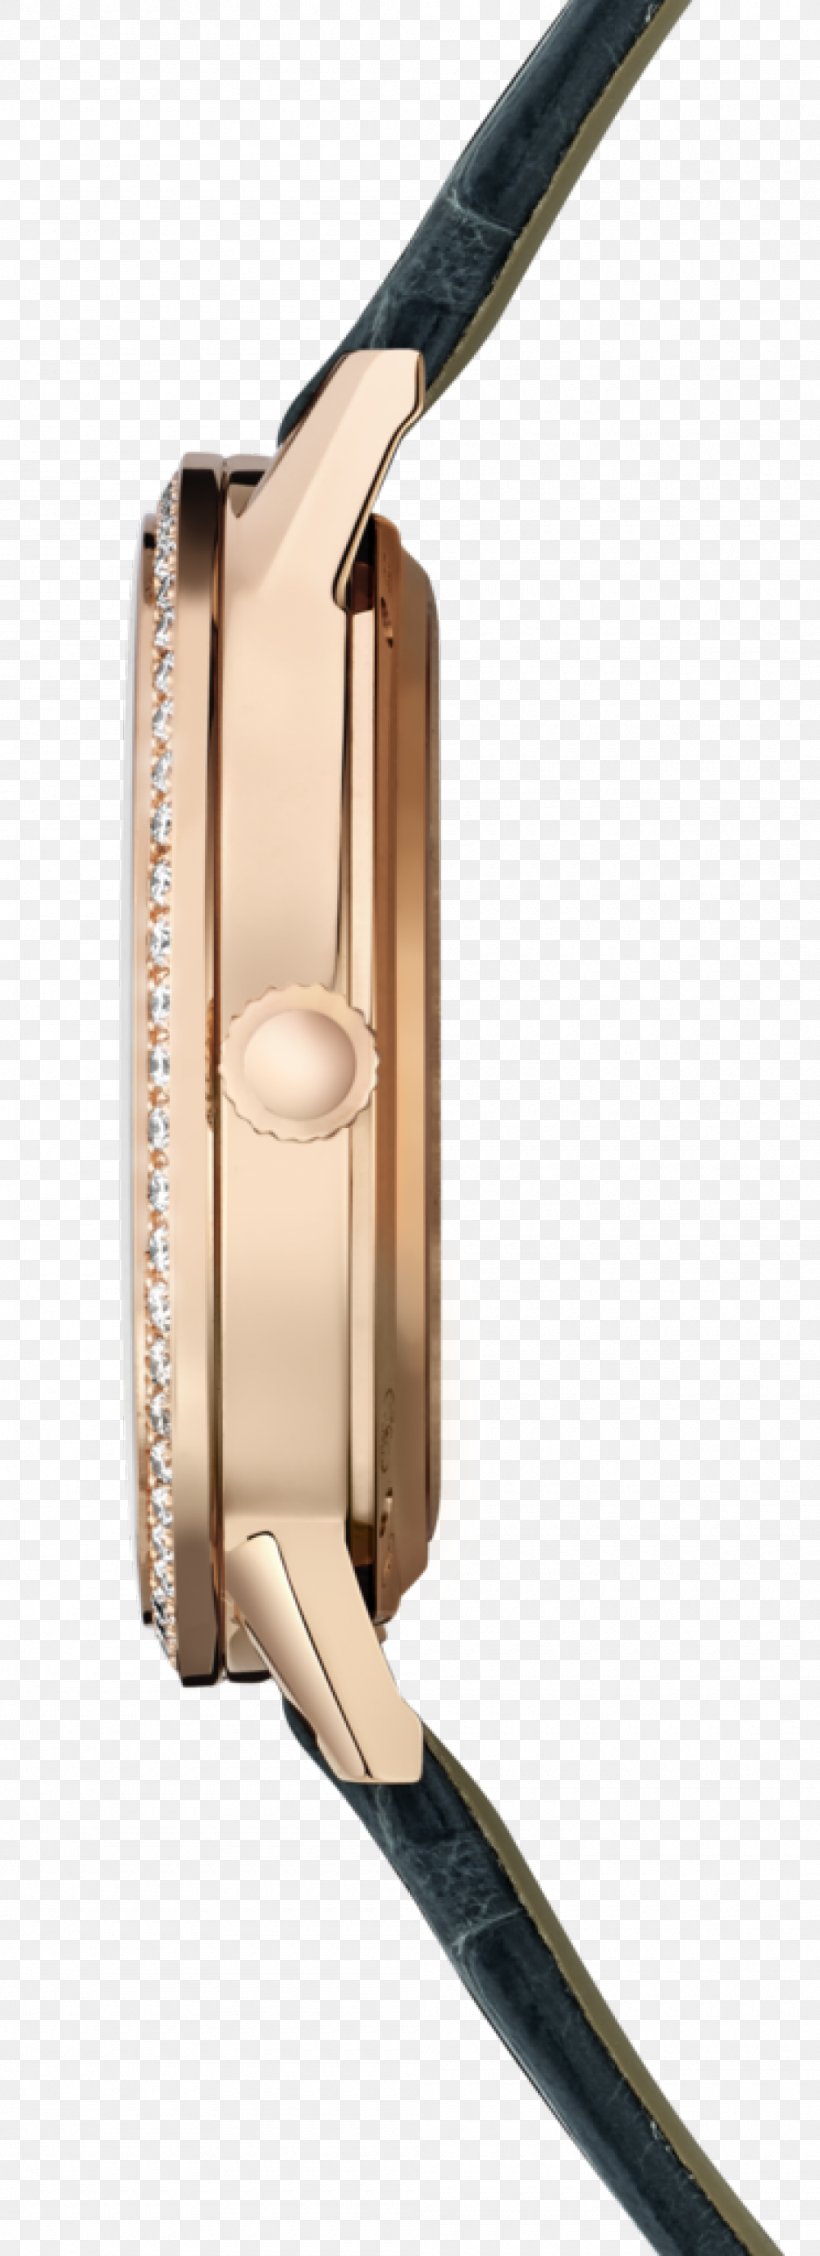 Watch Strap Jaeger-LeCoultre Power Reserve Indicator Movement, PNG, 1000x2752px, Watch, Calibre, Jaegerlecoultre, Metal, Movement Download Free